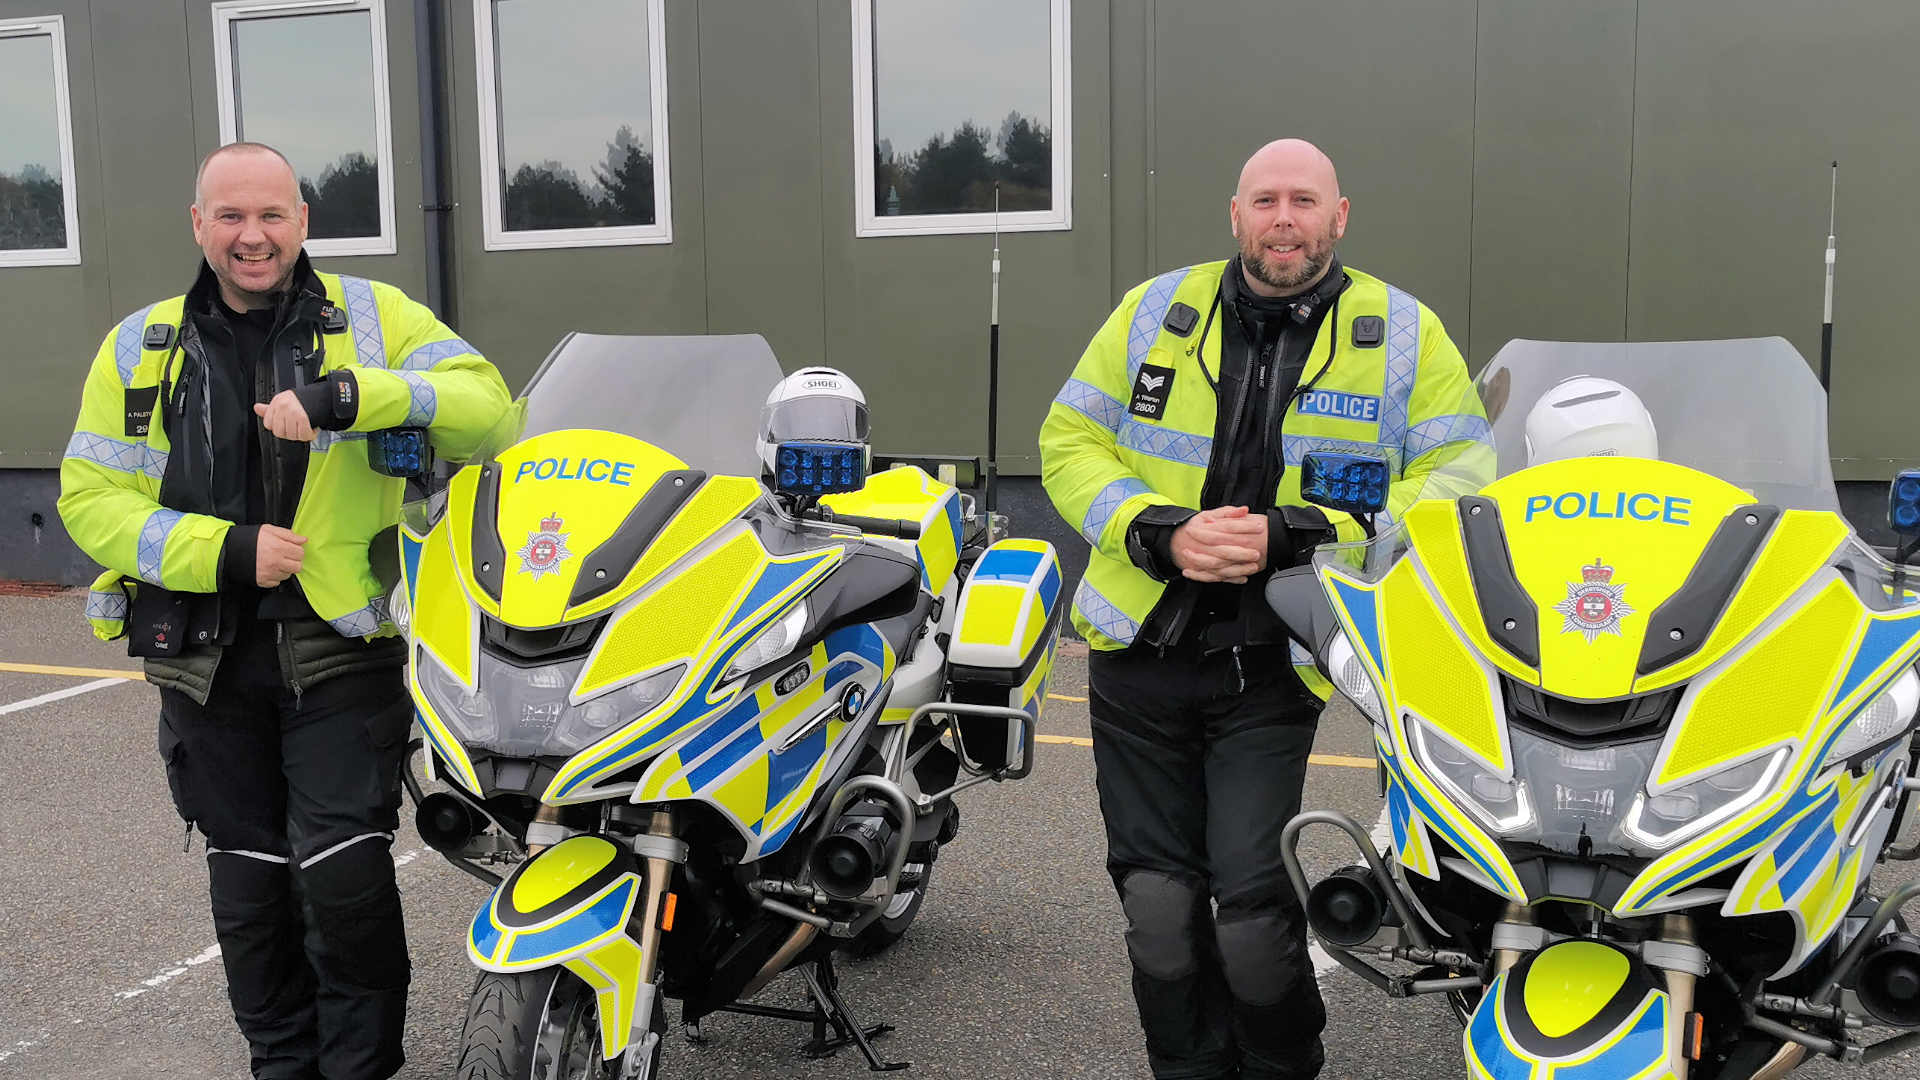 Police offer Bike Safe courses across county